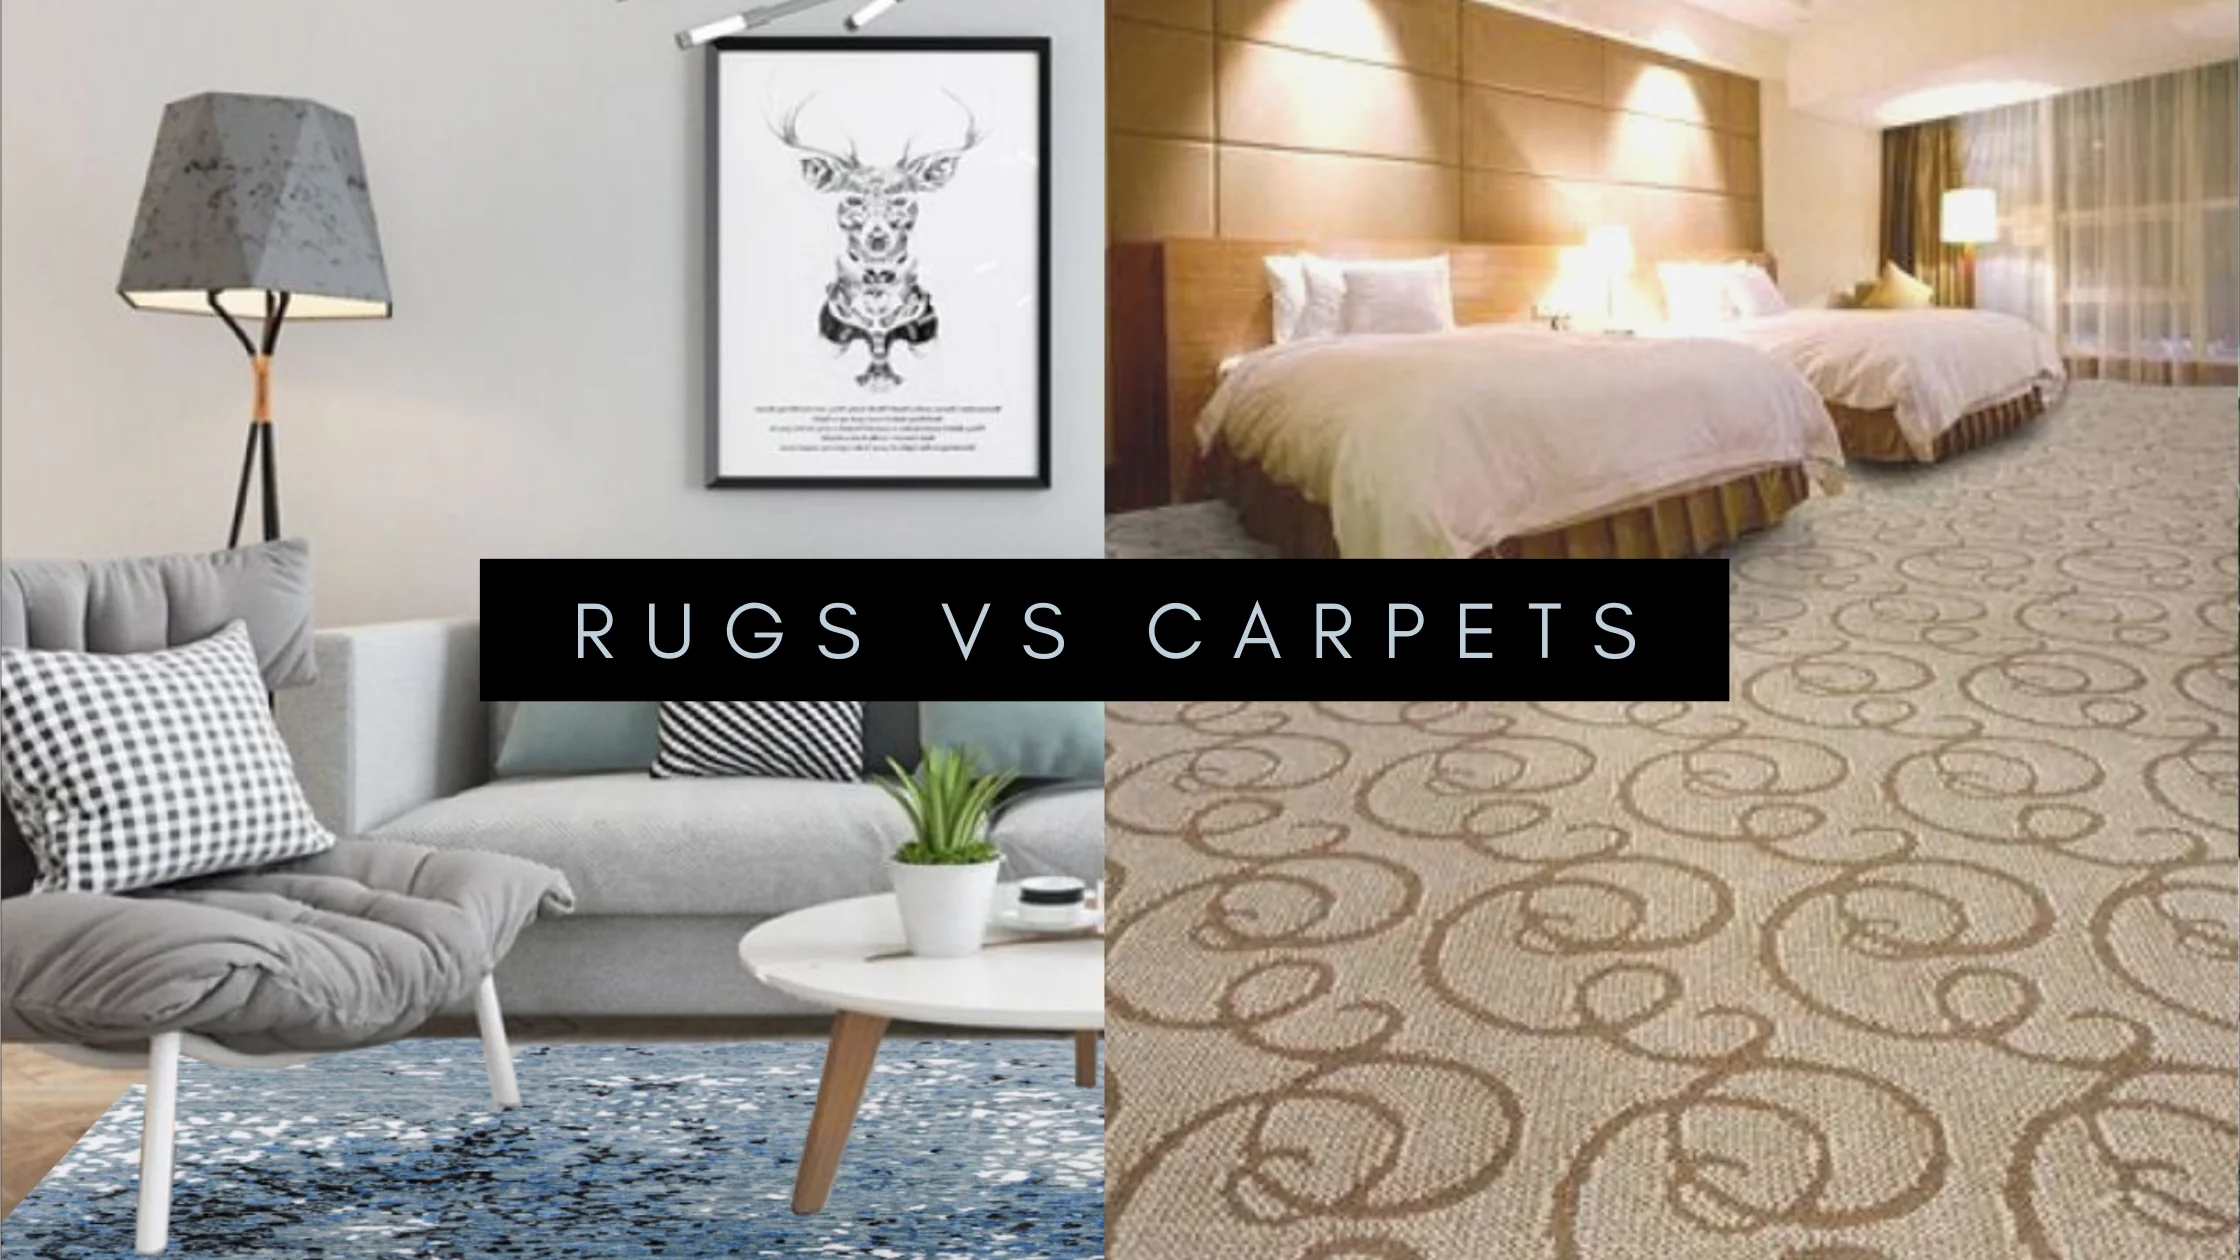 What is Carpets And Rugs